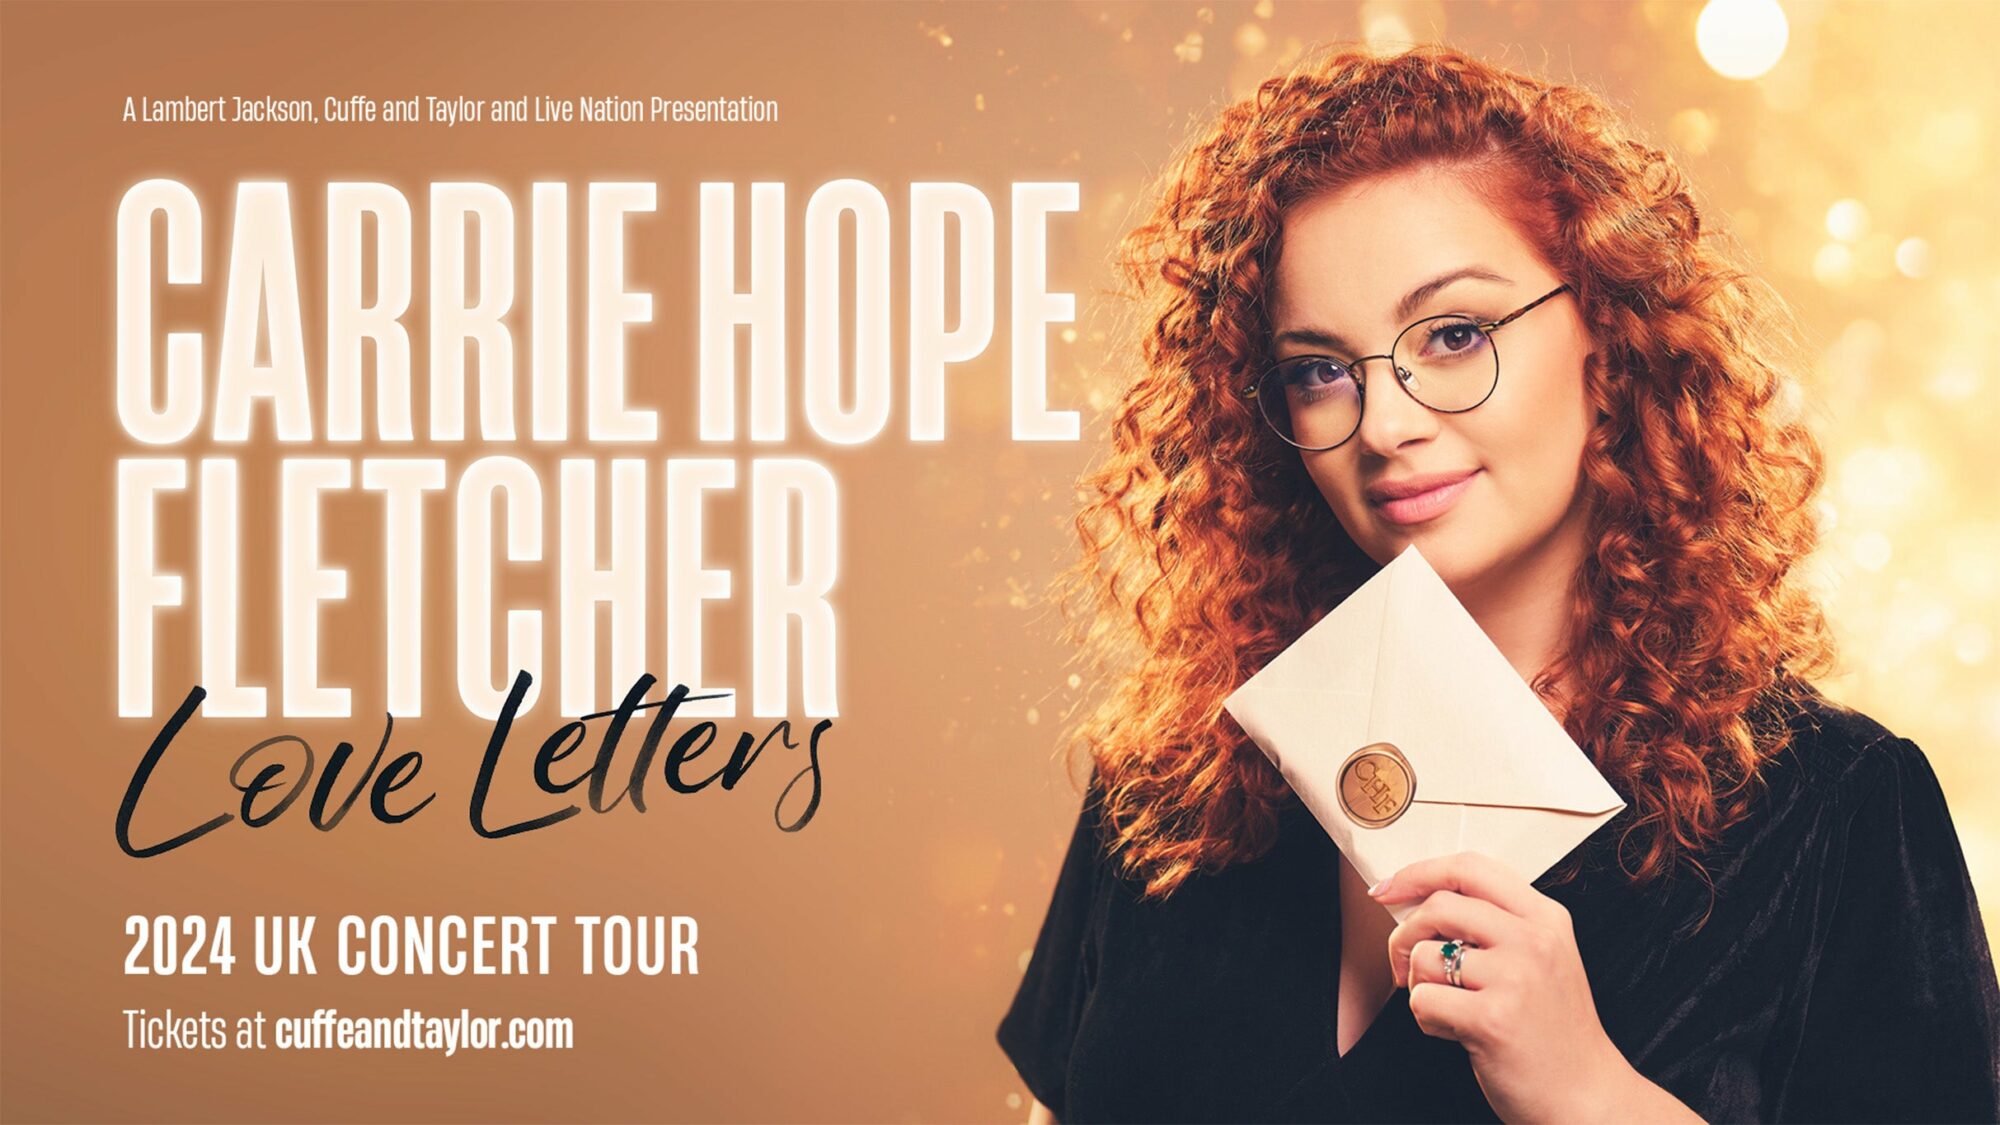 Image name Carrie Hope Fletcher Love Letters at York Barbican York the 29 image from the post Events in Yorkshire.com.